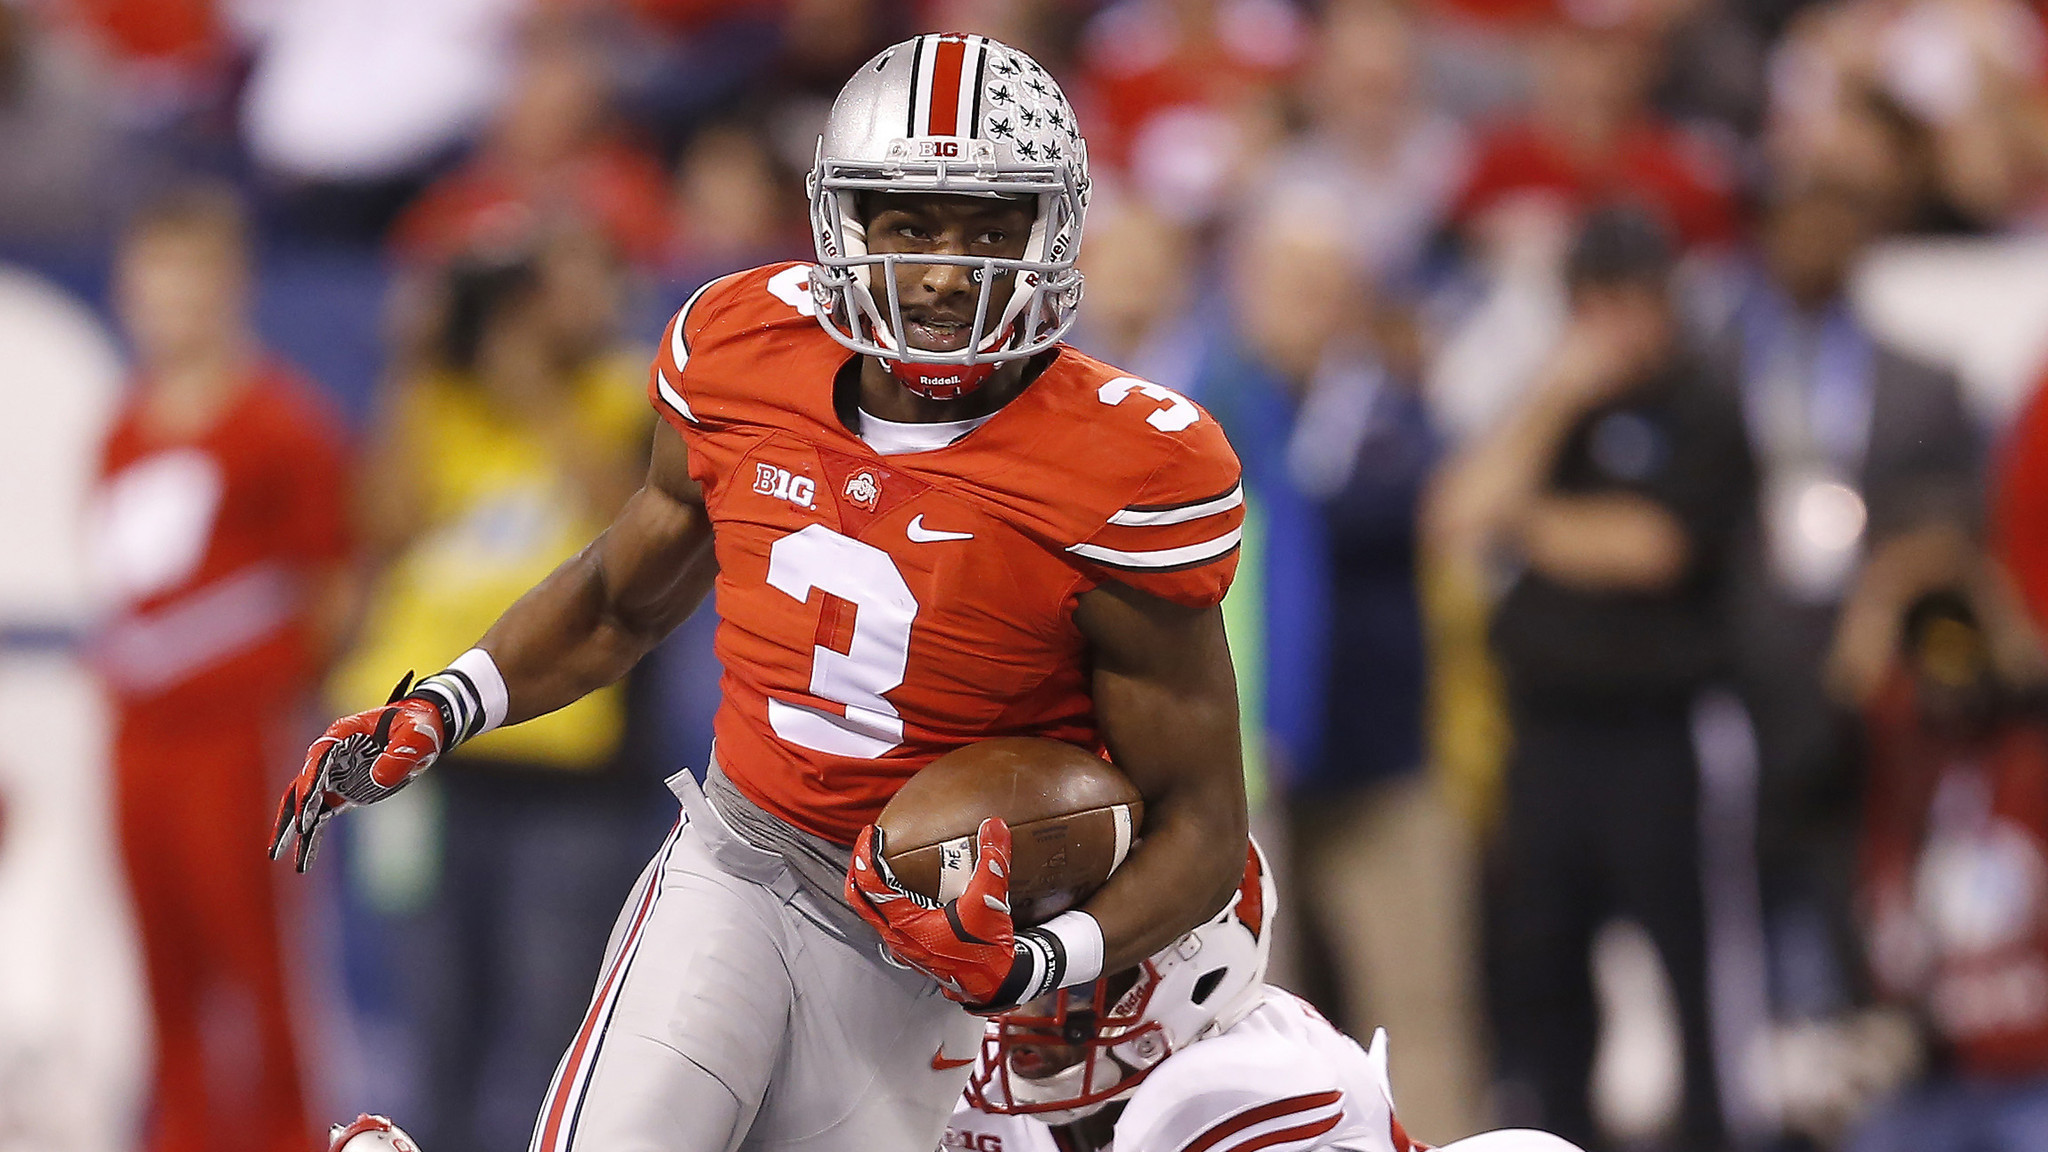 Ohio State's Michael Thomas backs up sharp play with hard work - The ...